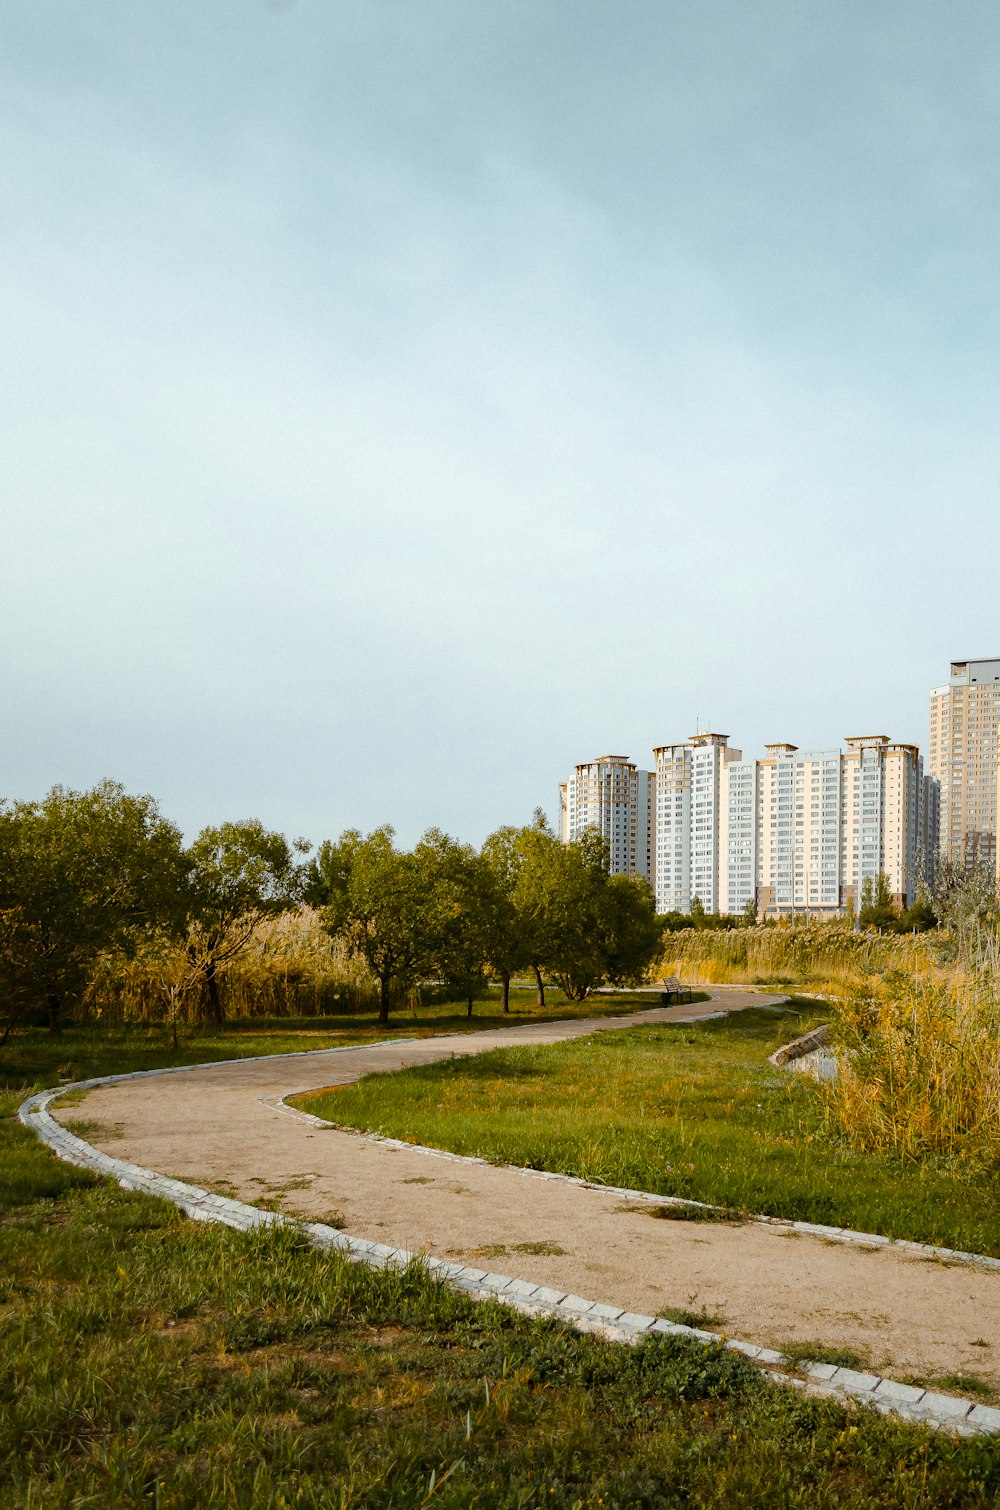 a path in a park with tall buildings in the background